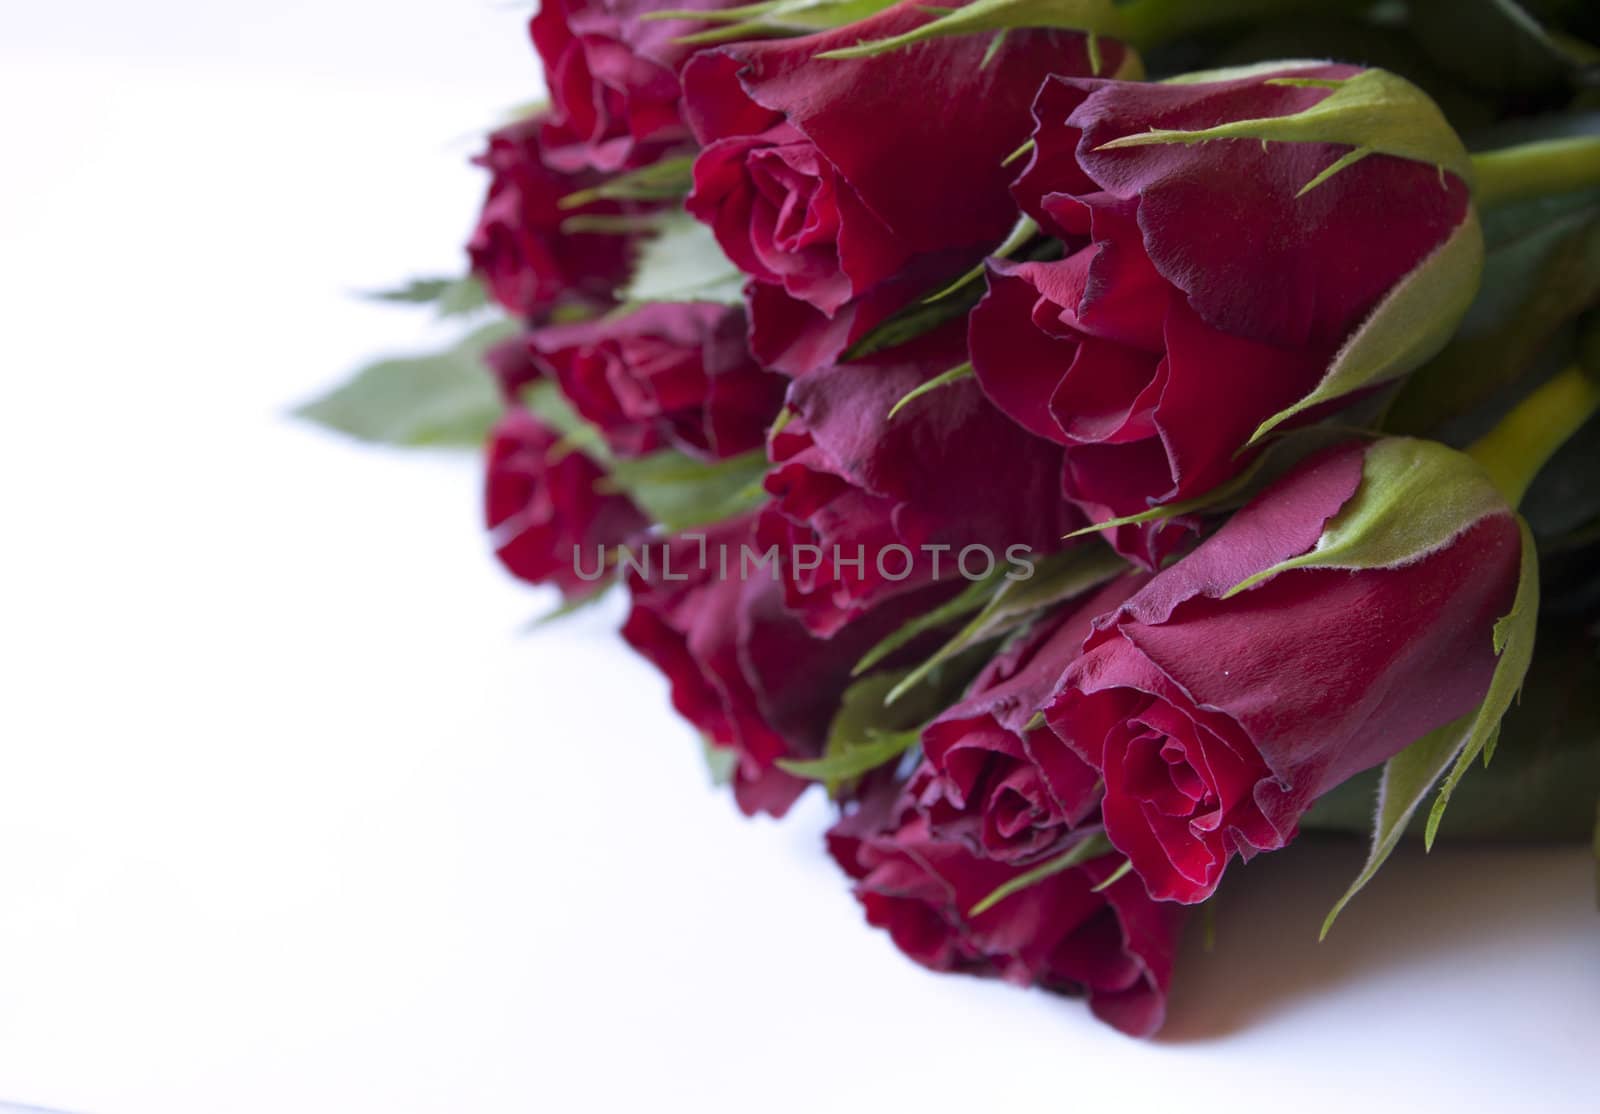 many beautiful red roses over white background